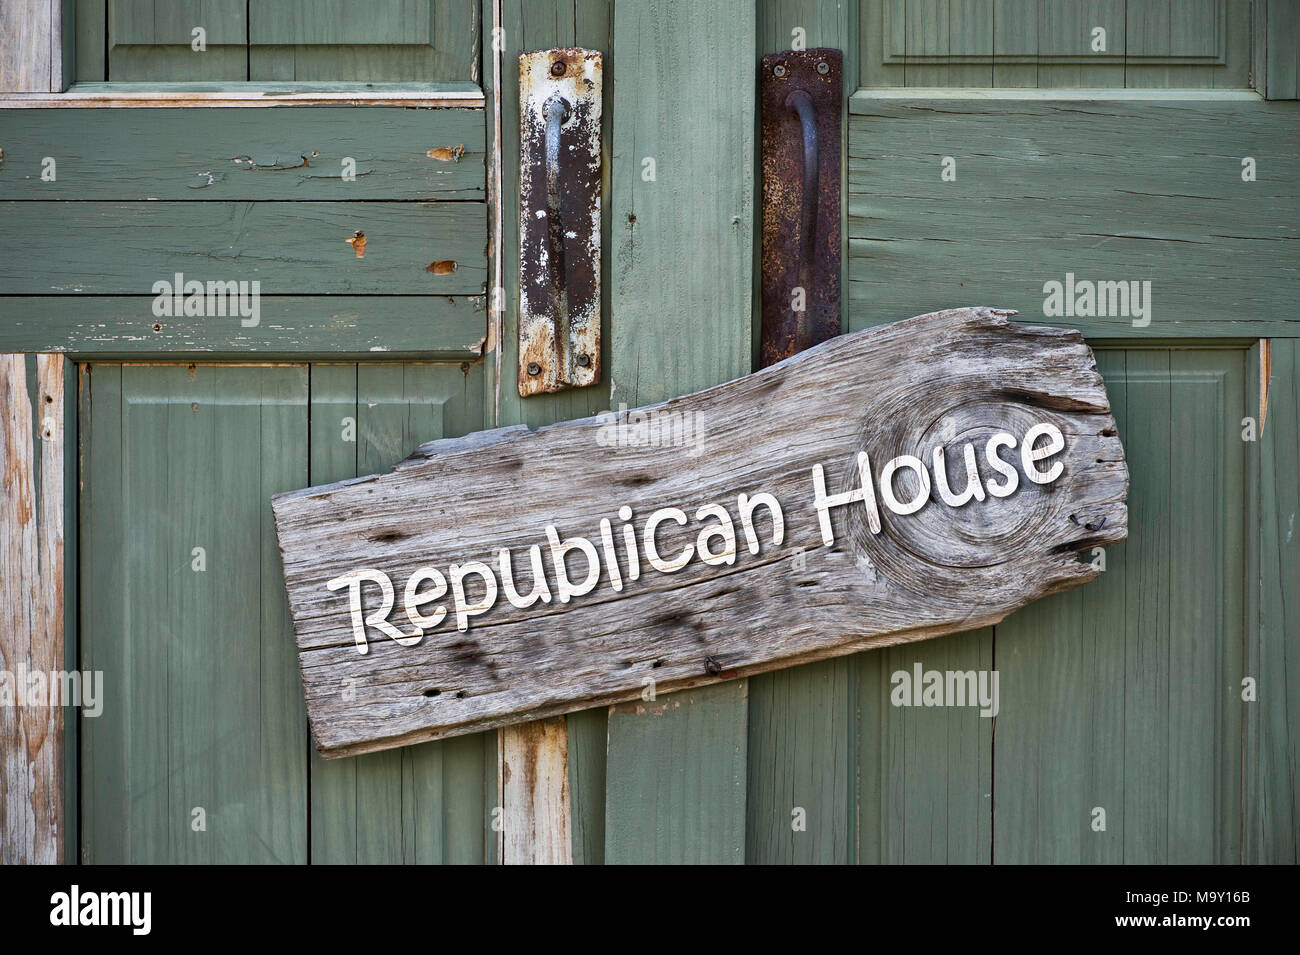 Republican house sign on old green doors. Stock Photo